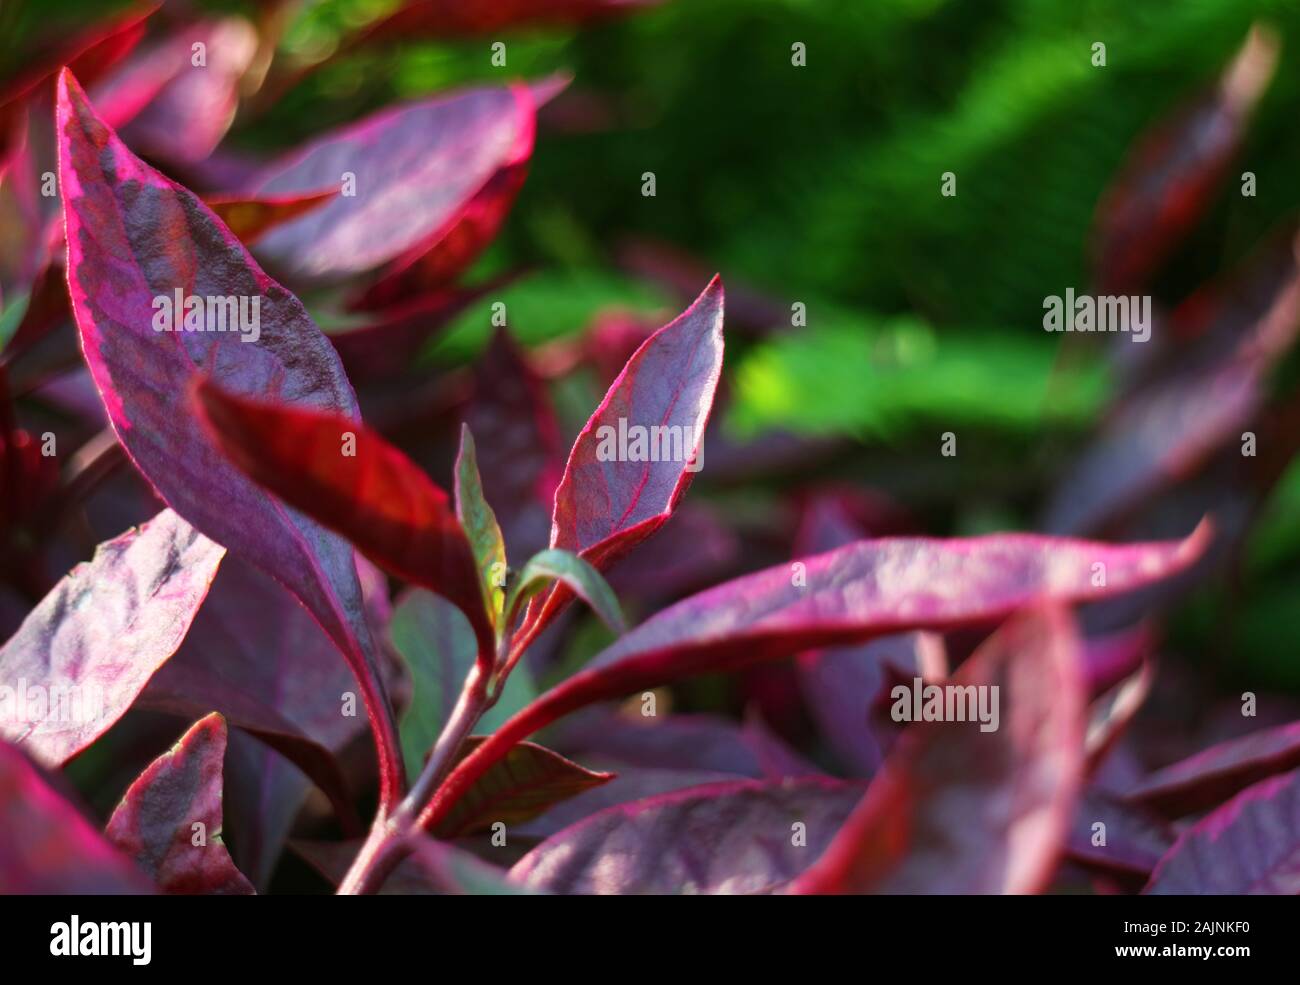 Closeup purple leaves of the tropical plants with green foliage in the backdrop Stock Photo